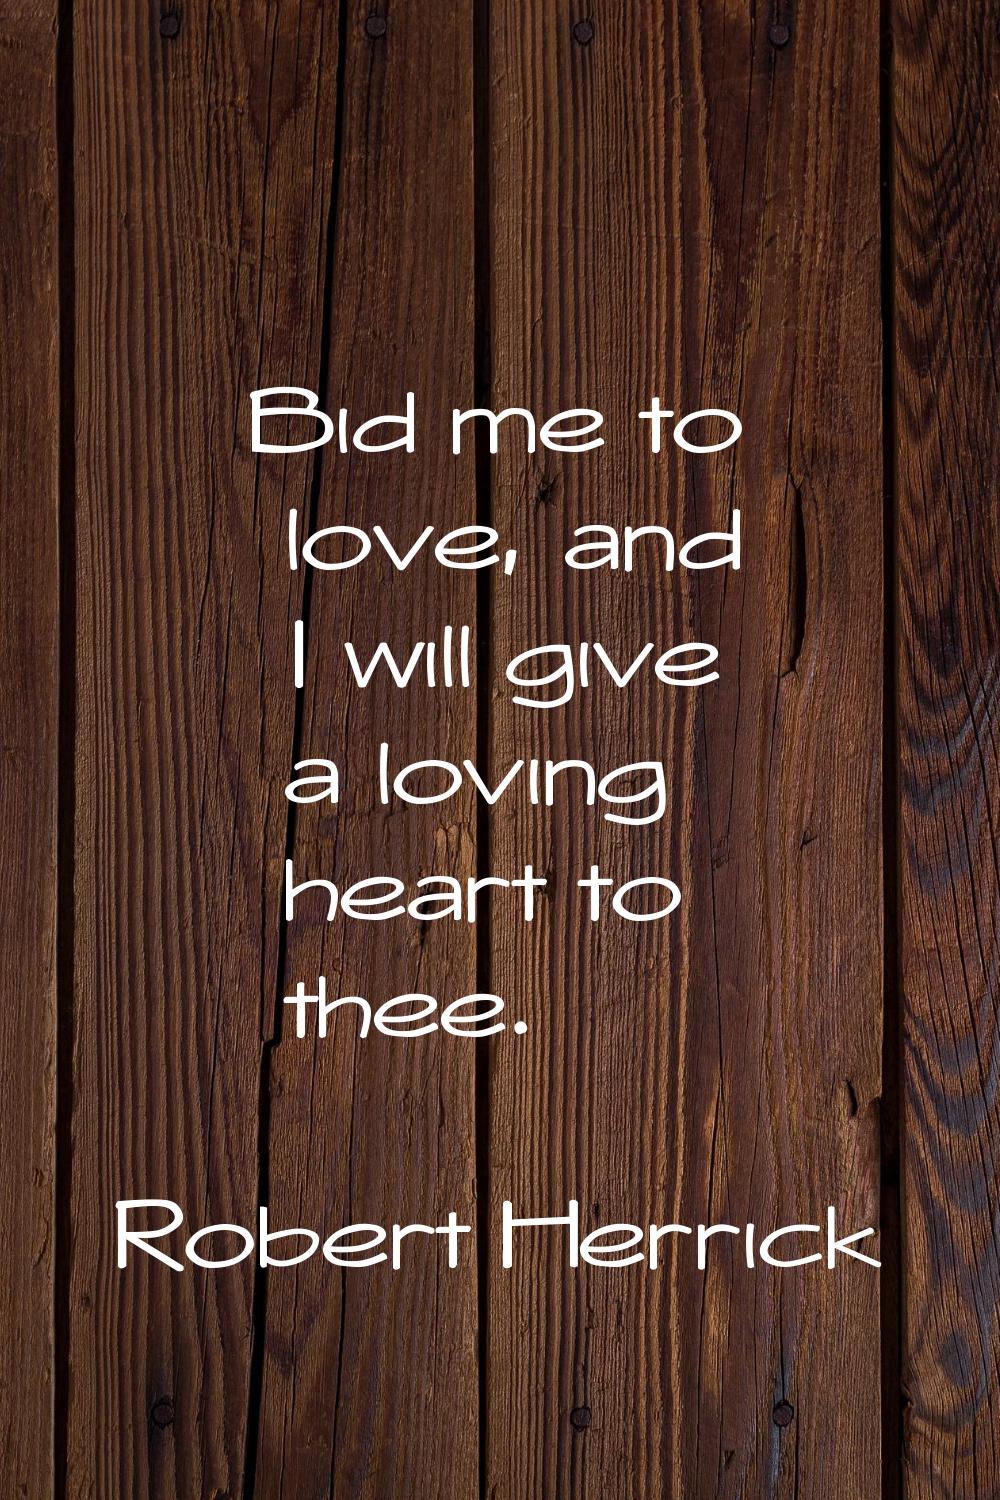 Bid me to love, and I will give a loving heart to thee.